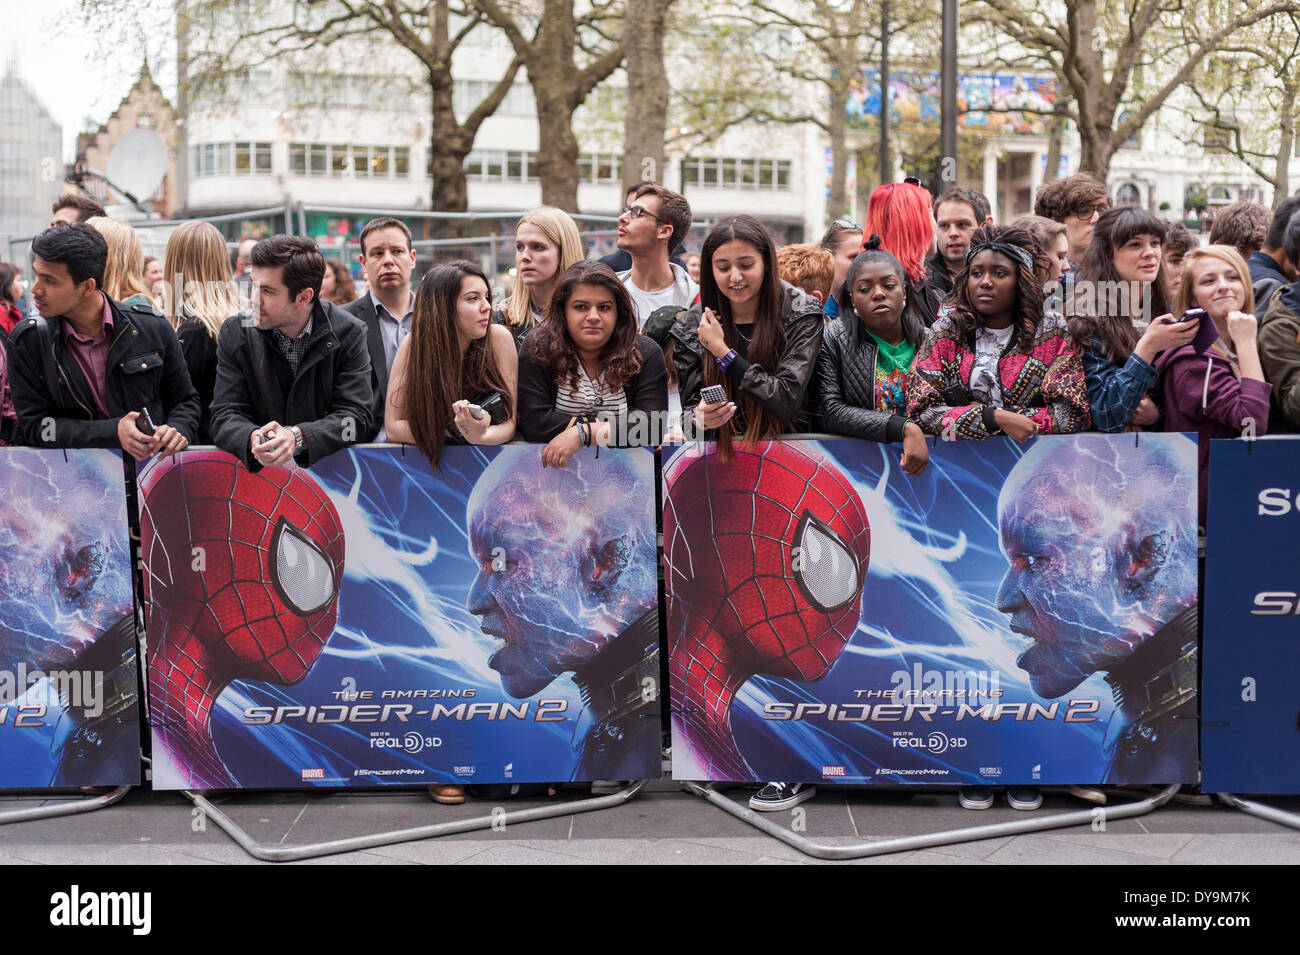 Leicester Square, London, UK, 10 April 2014.  Crowds gather to see the stars of "The Amazing Spider-Man 2" movie which was having its world premiere. Credit:  Stephen Chung/Alamy Live News Stock Photo